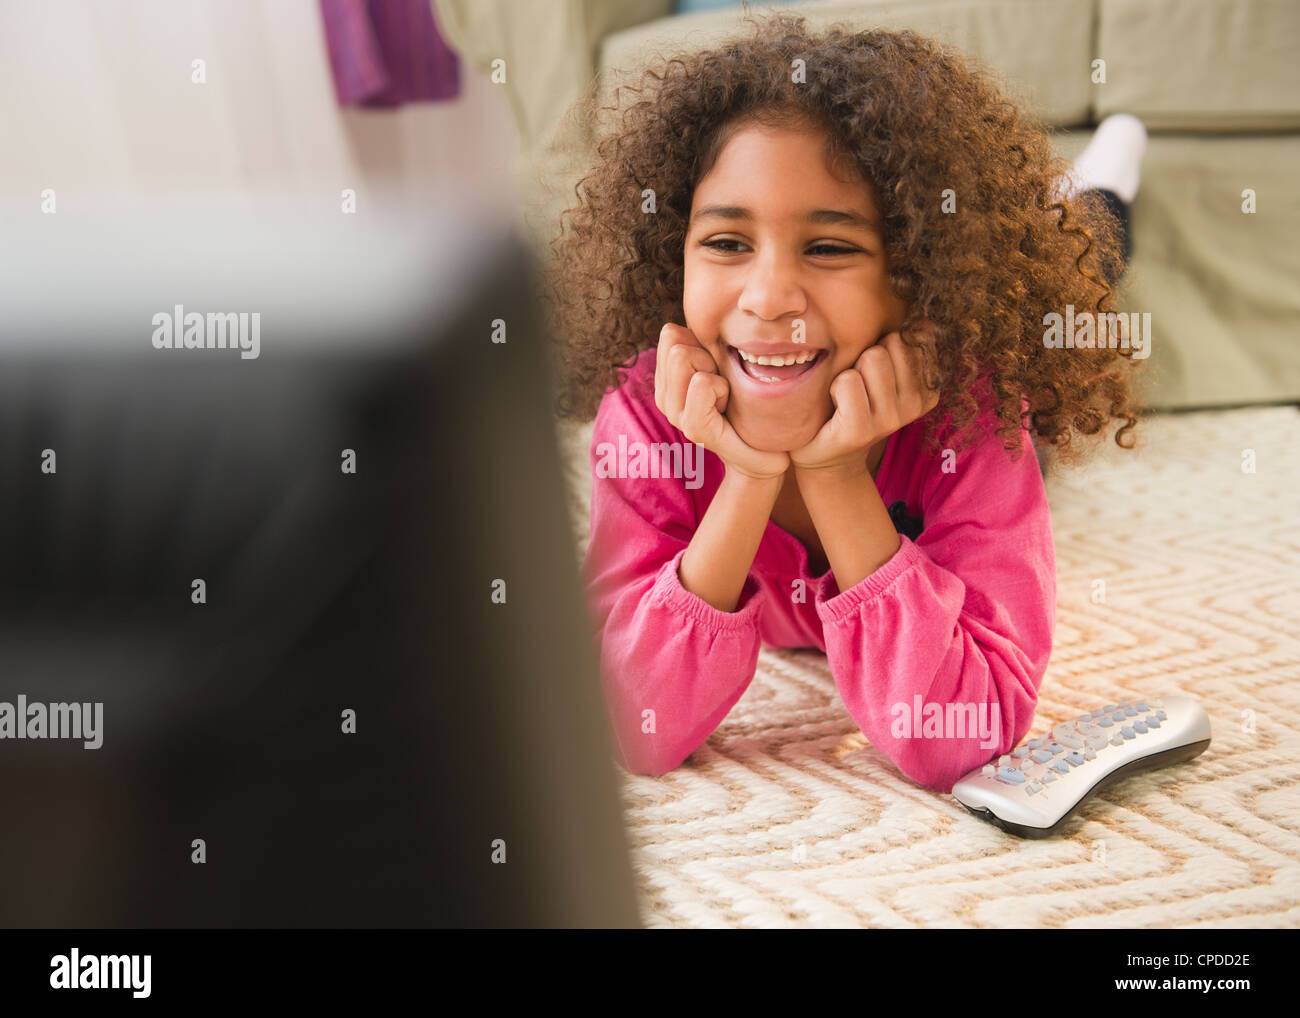 Mixed race girl laying on floor watching television Stock Photo